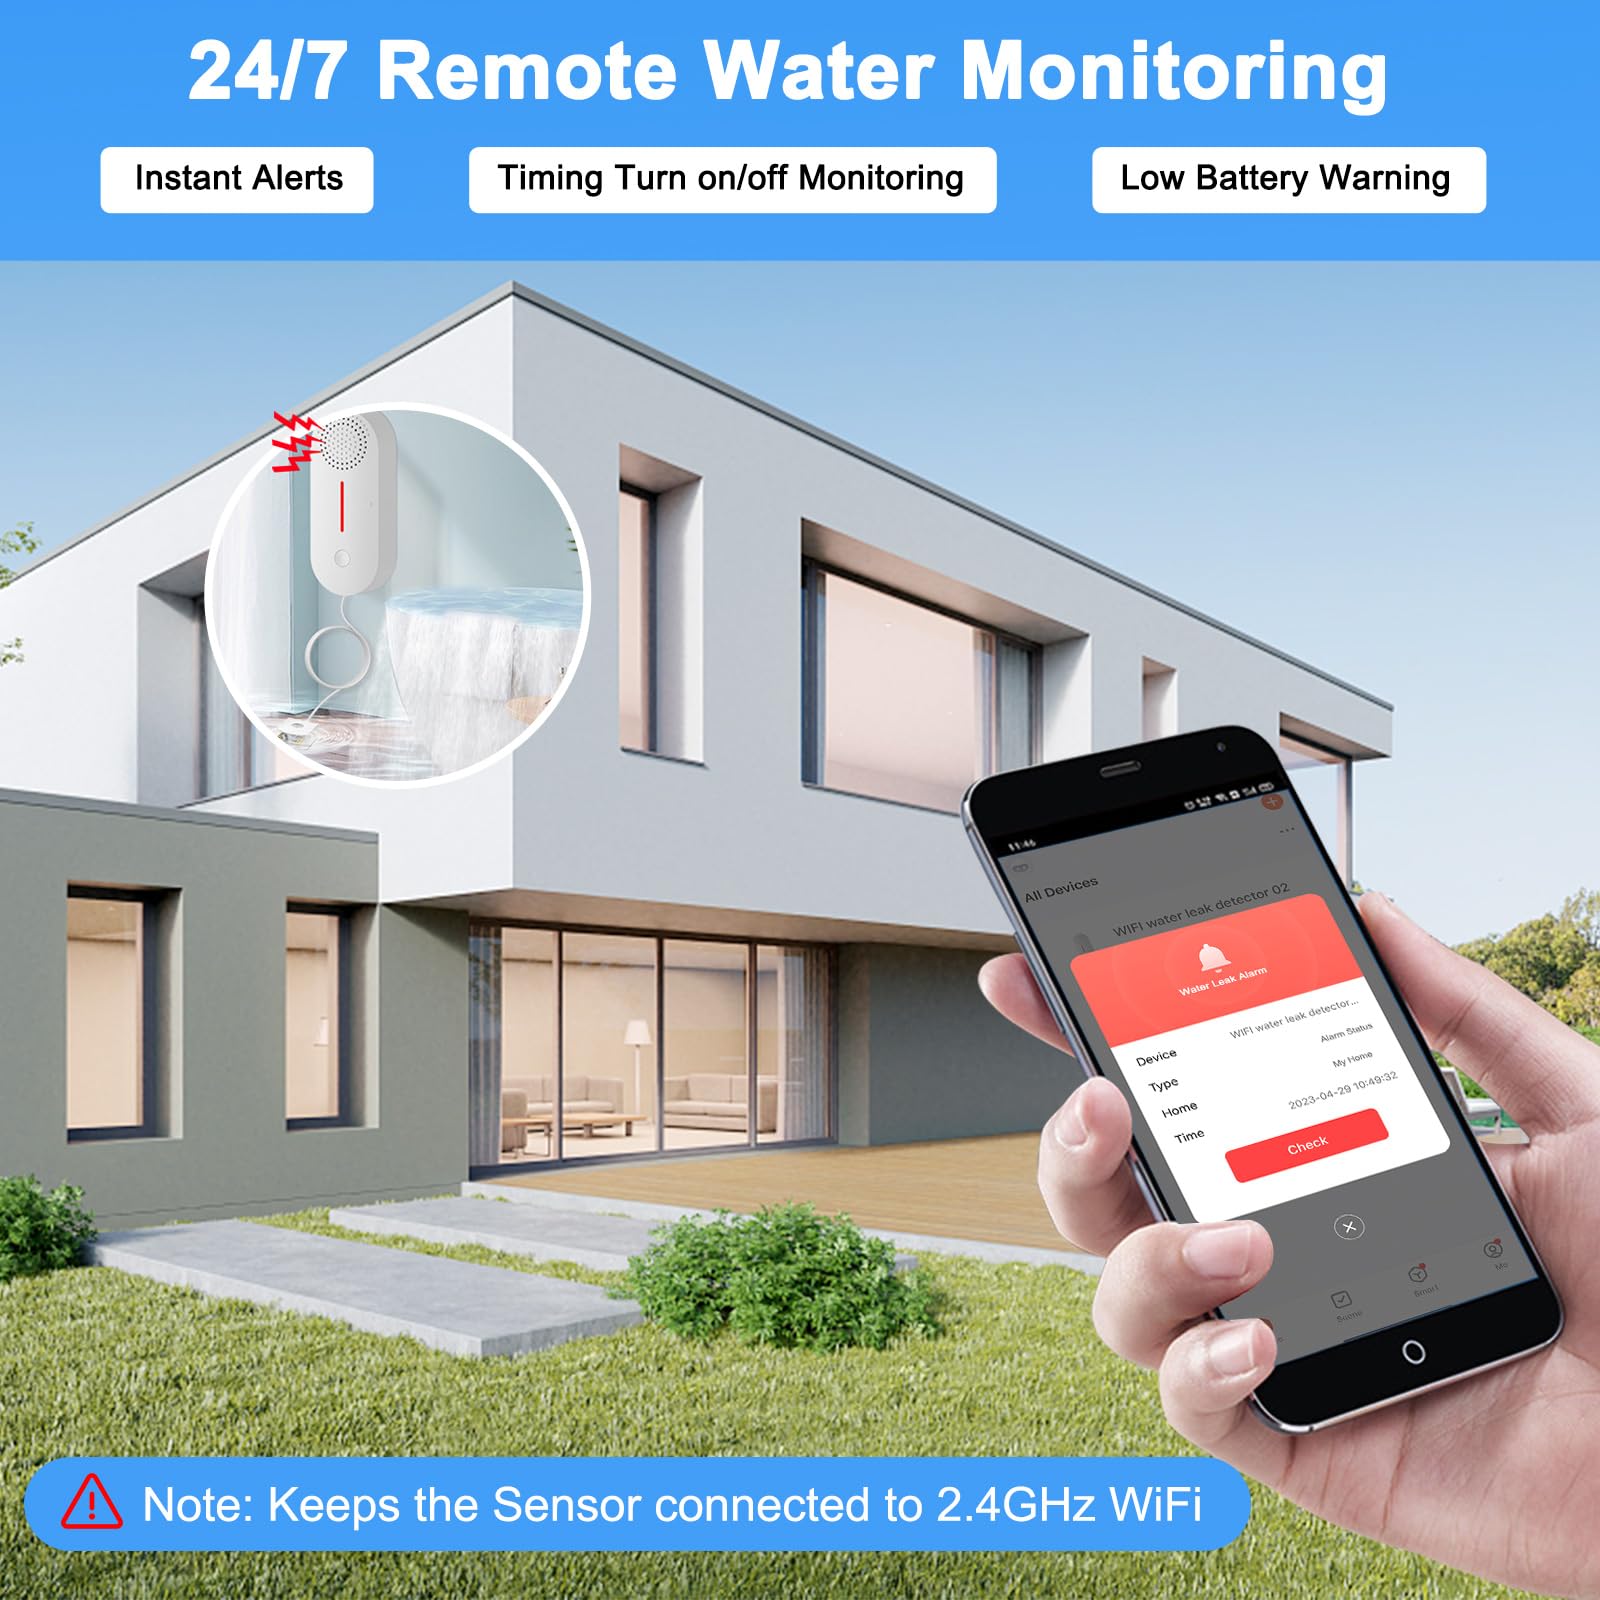 DAYTECH 2-in-1 Water Leak Detector and Water Level Sensor - WiFi Alarm System with 100dB Alert